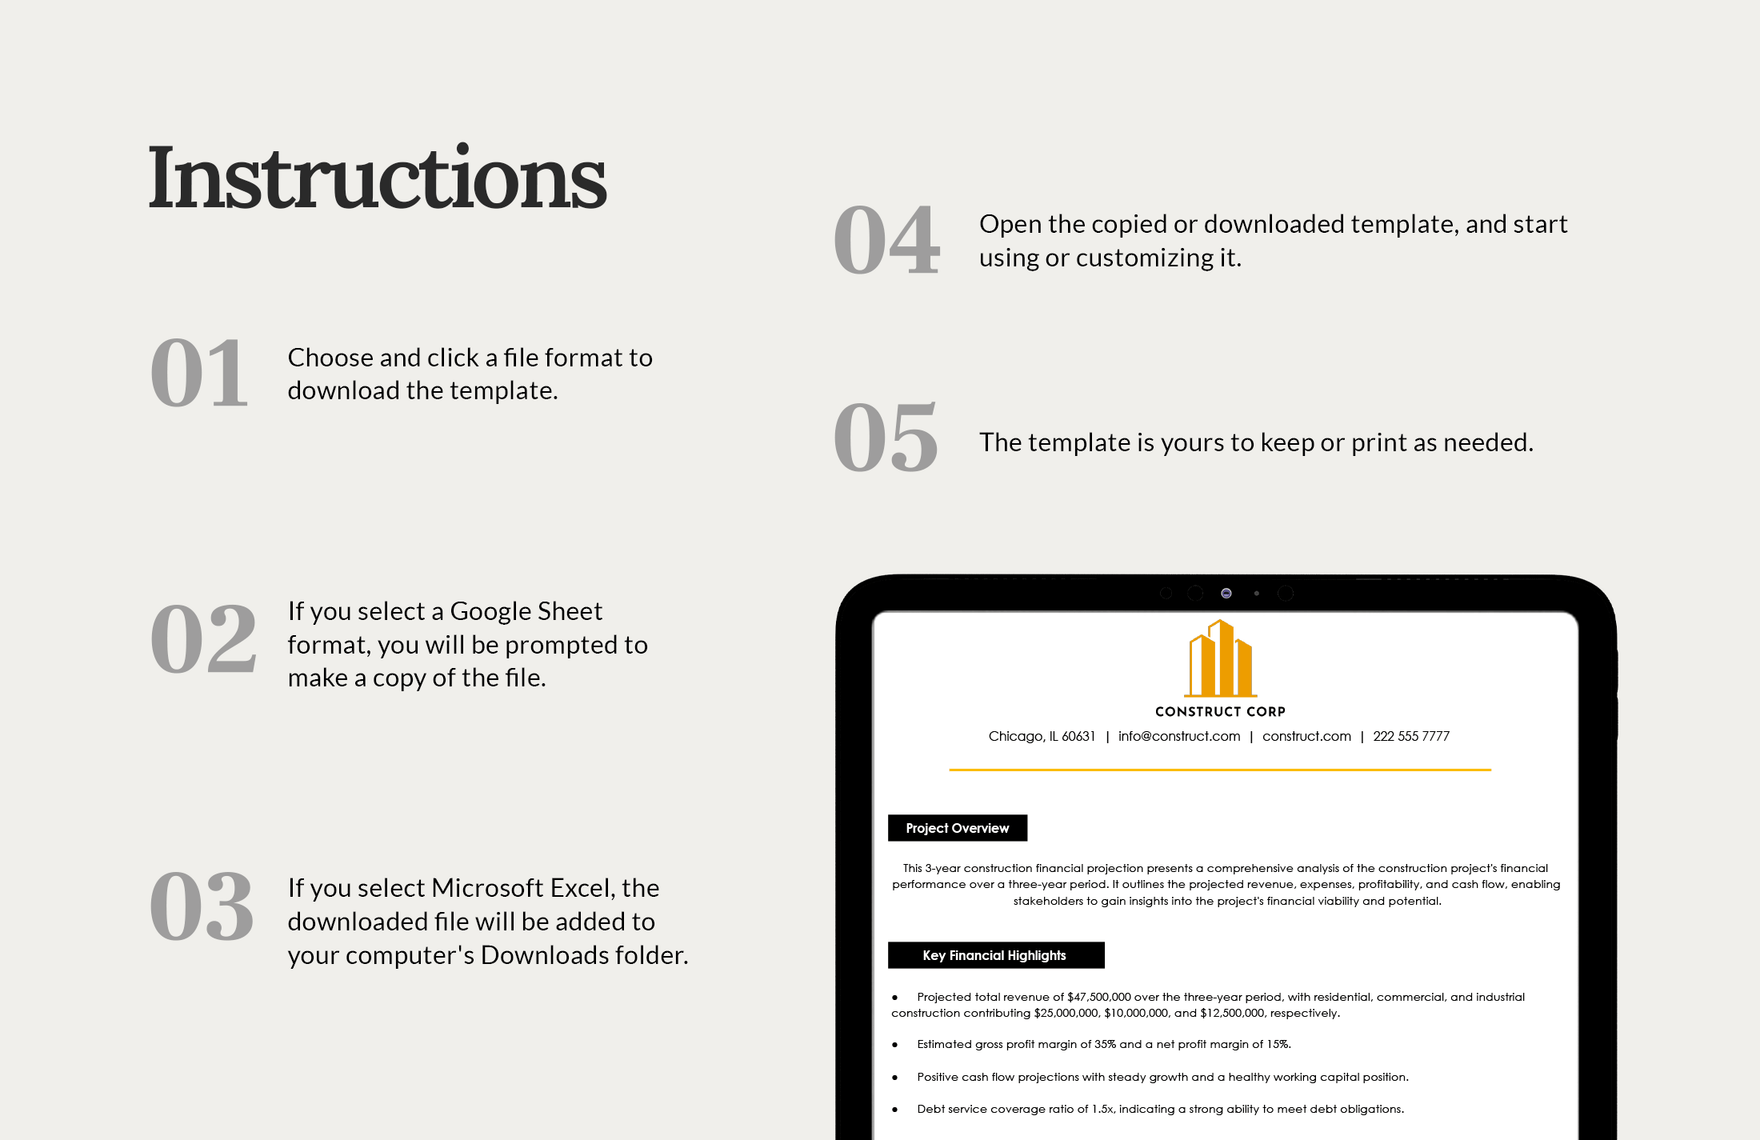 3-Year Construction Financial Projection Template